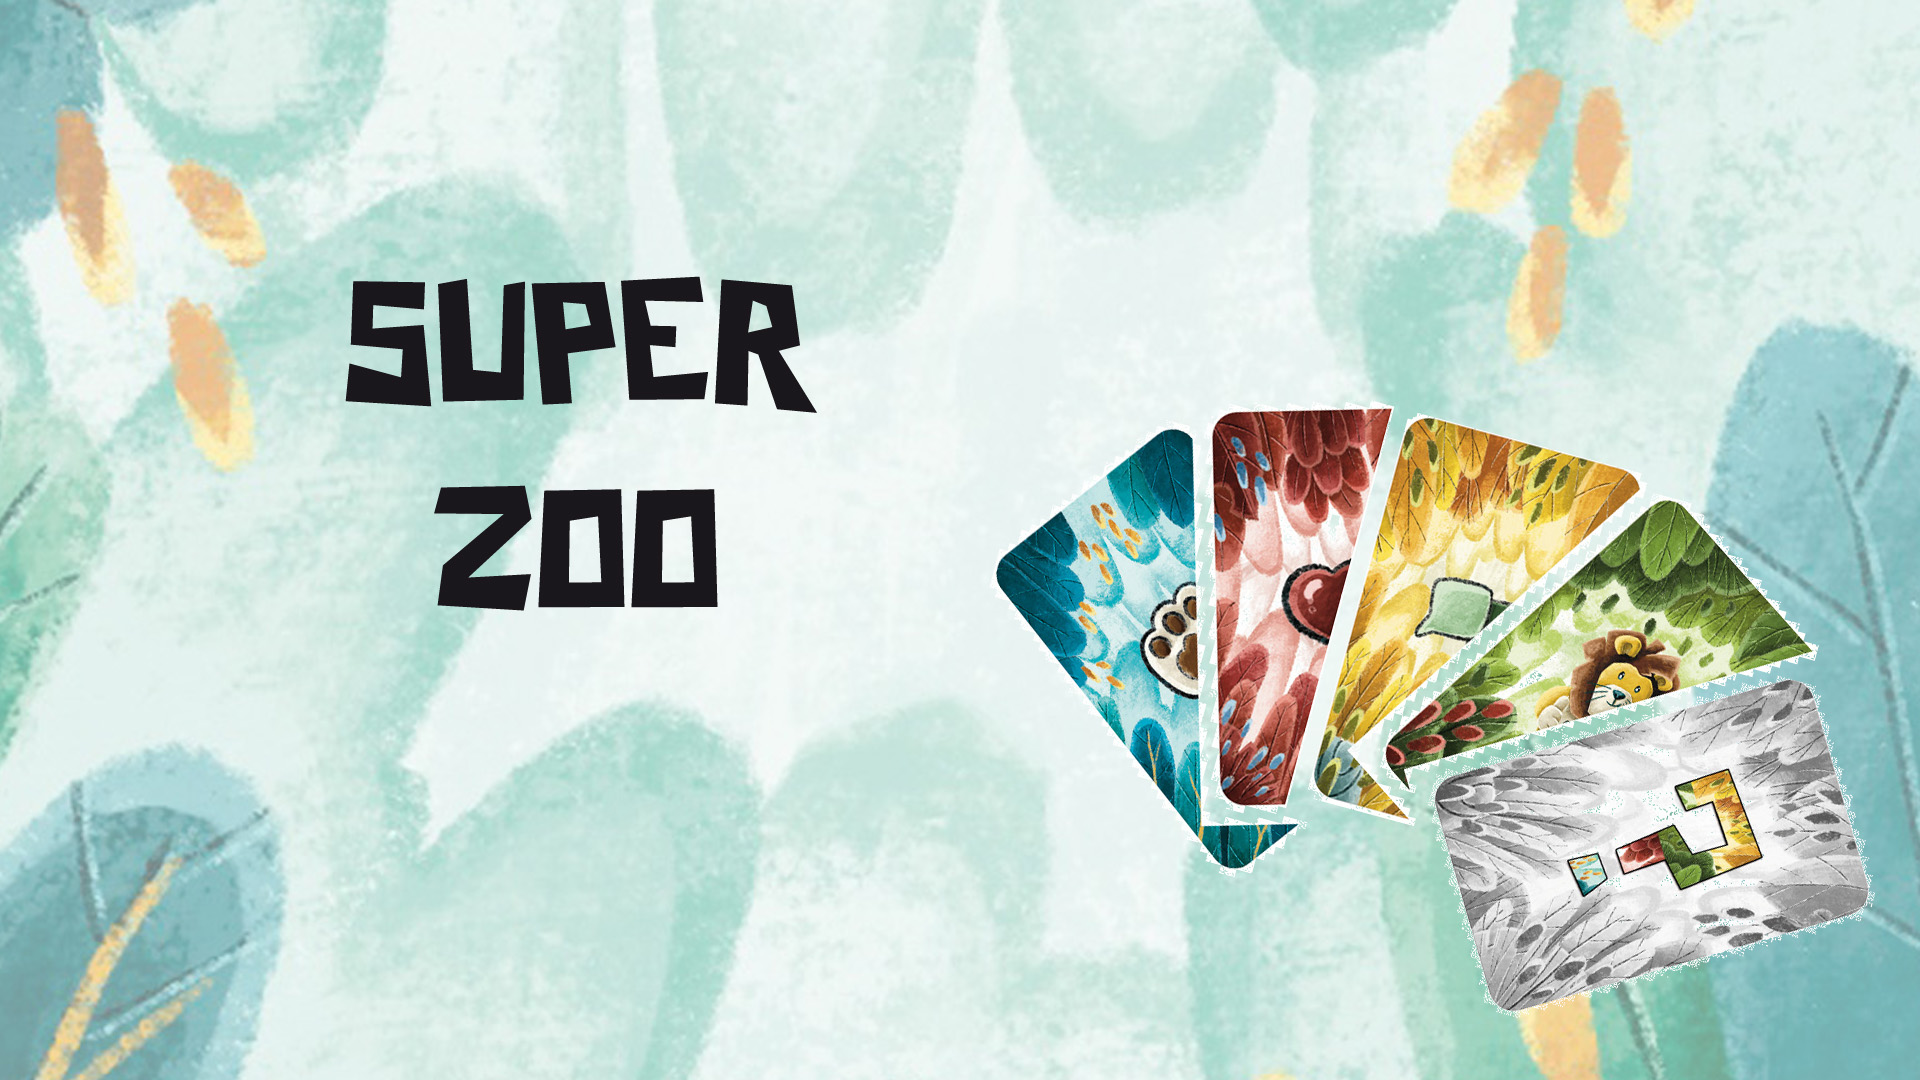 You are currently viewing Super – Zoo